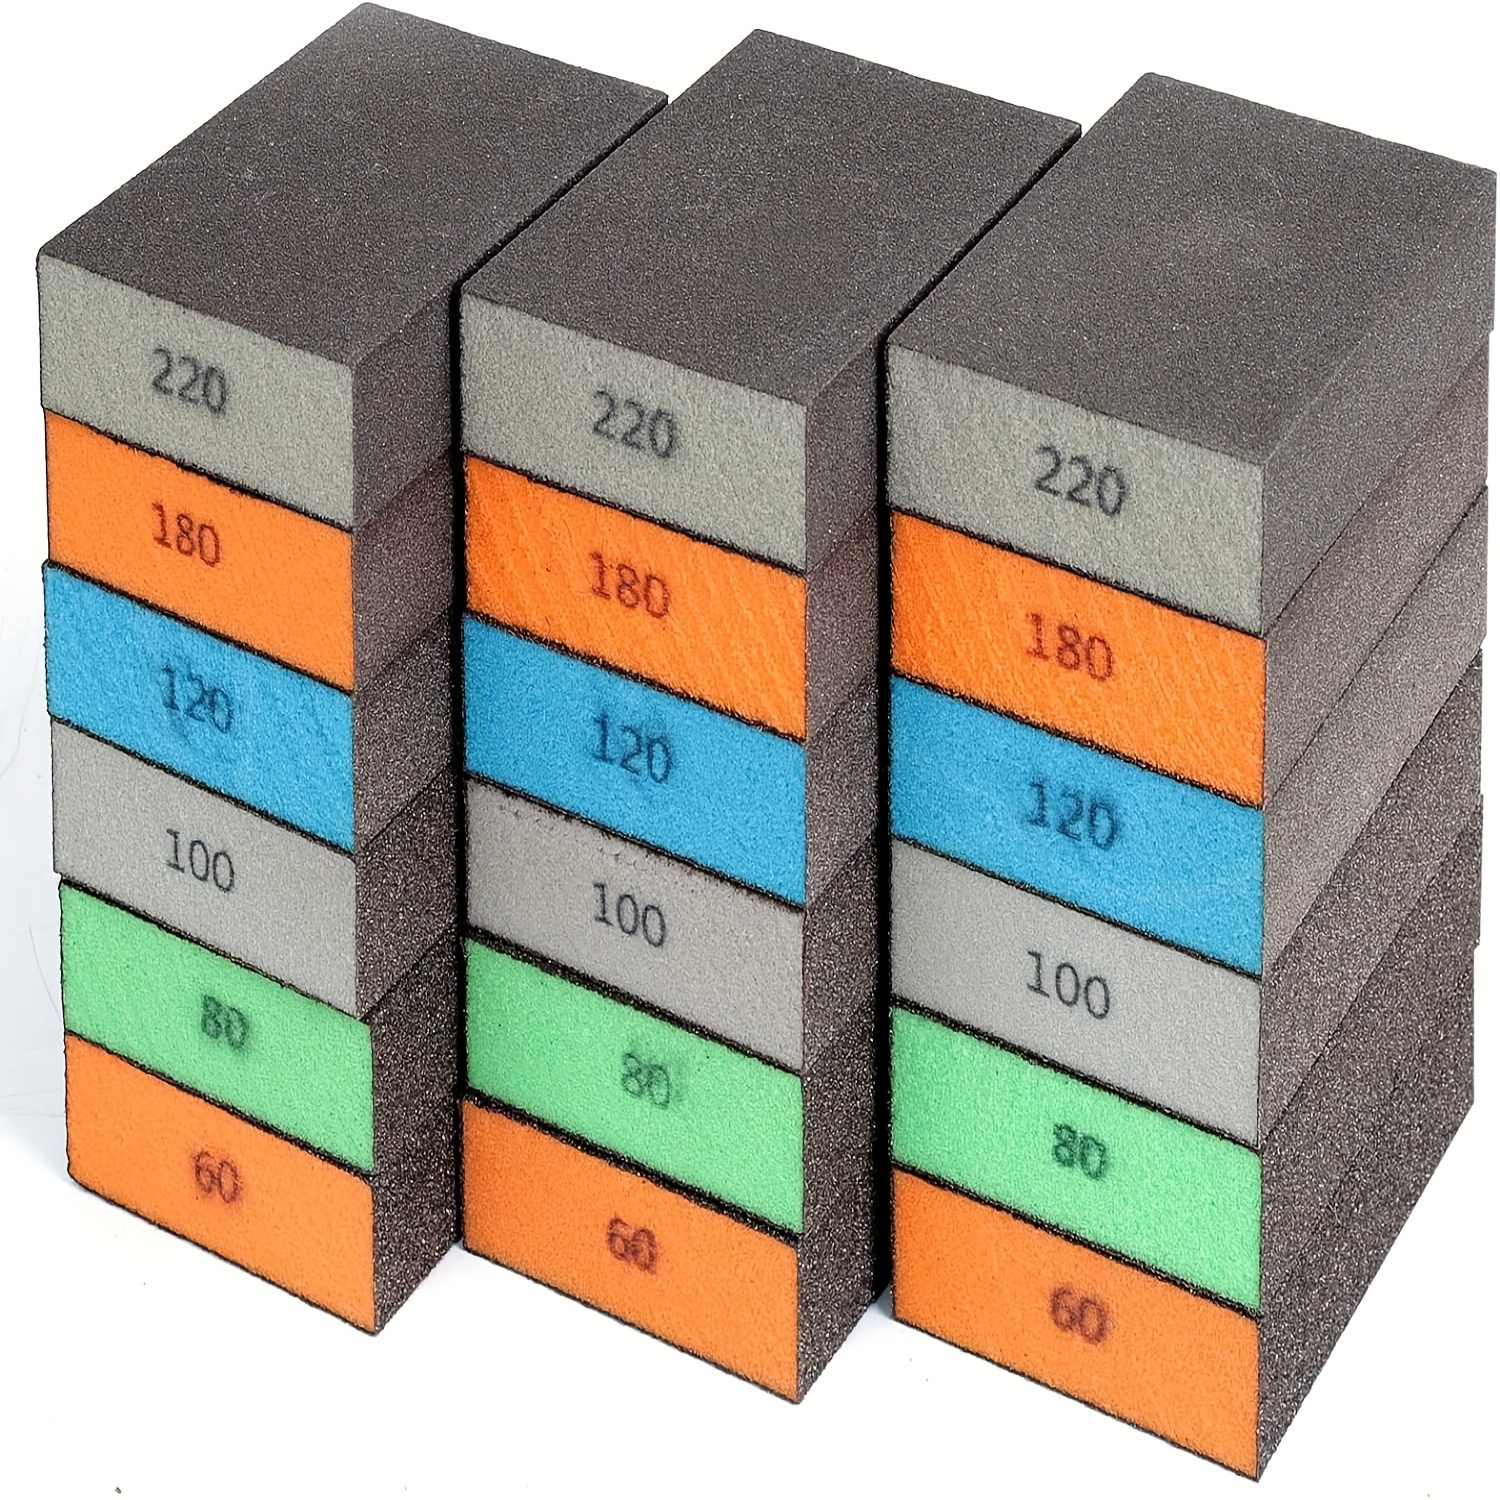 

6-piece Multi-size Sandpaper Blocks - Washable & Reusable, Ideal For Wood, Drywall & Metal Surfaces (60/80/100/120/180/220 Grit)